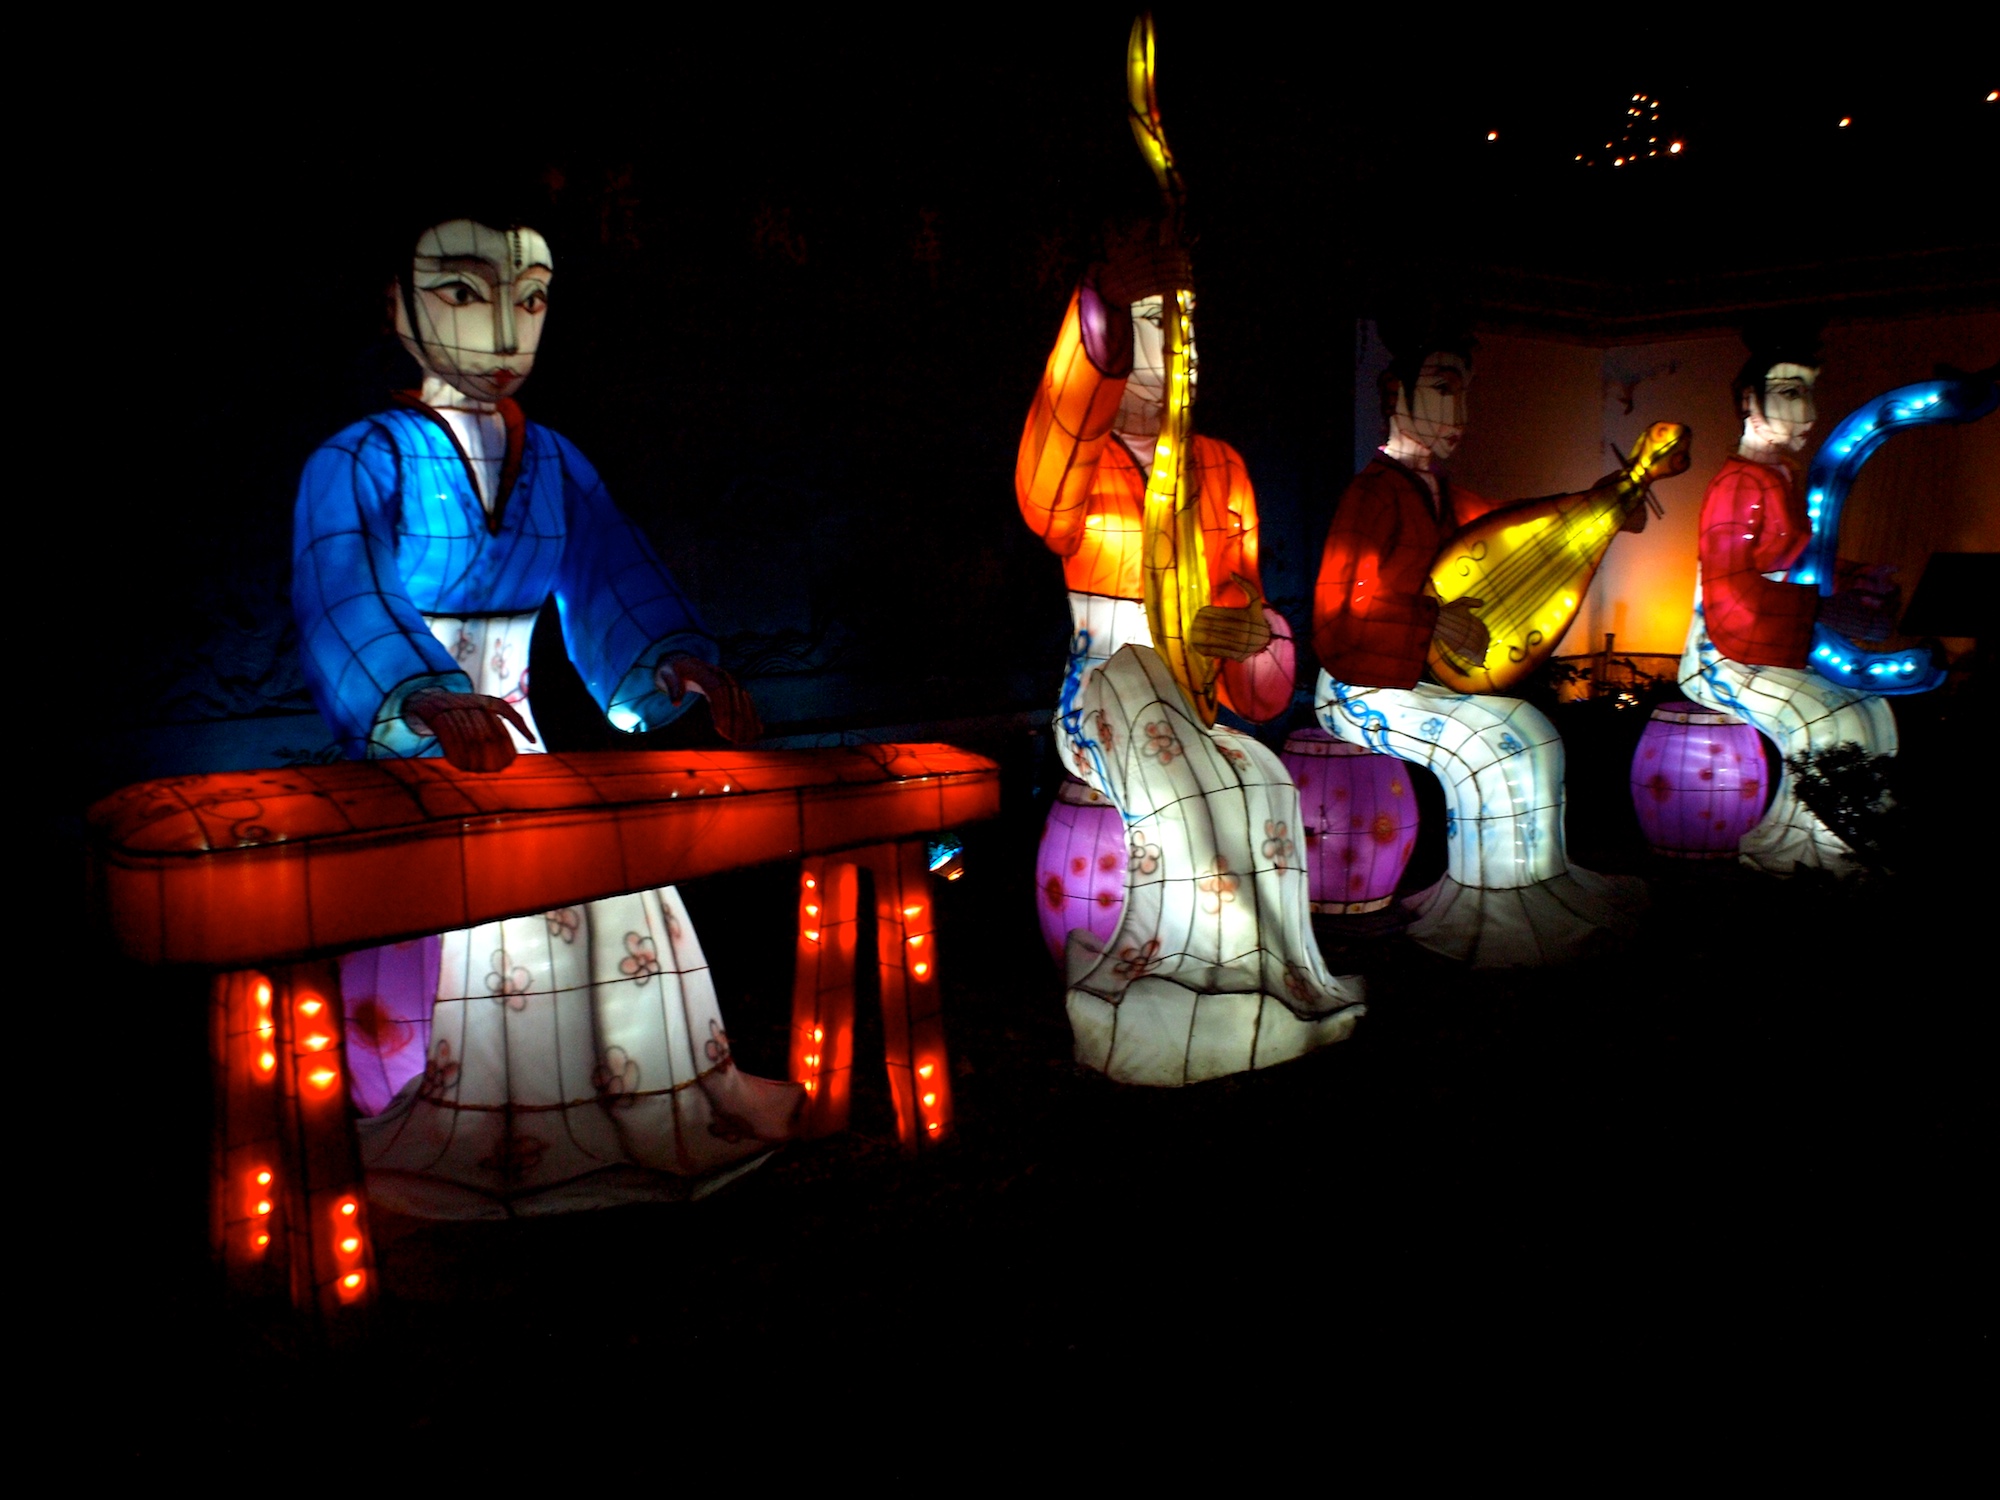 several large lighted lanterns are being displayed at night